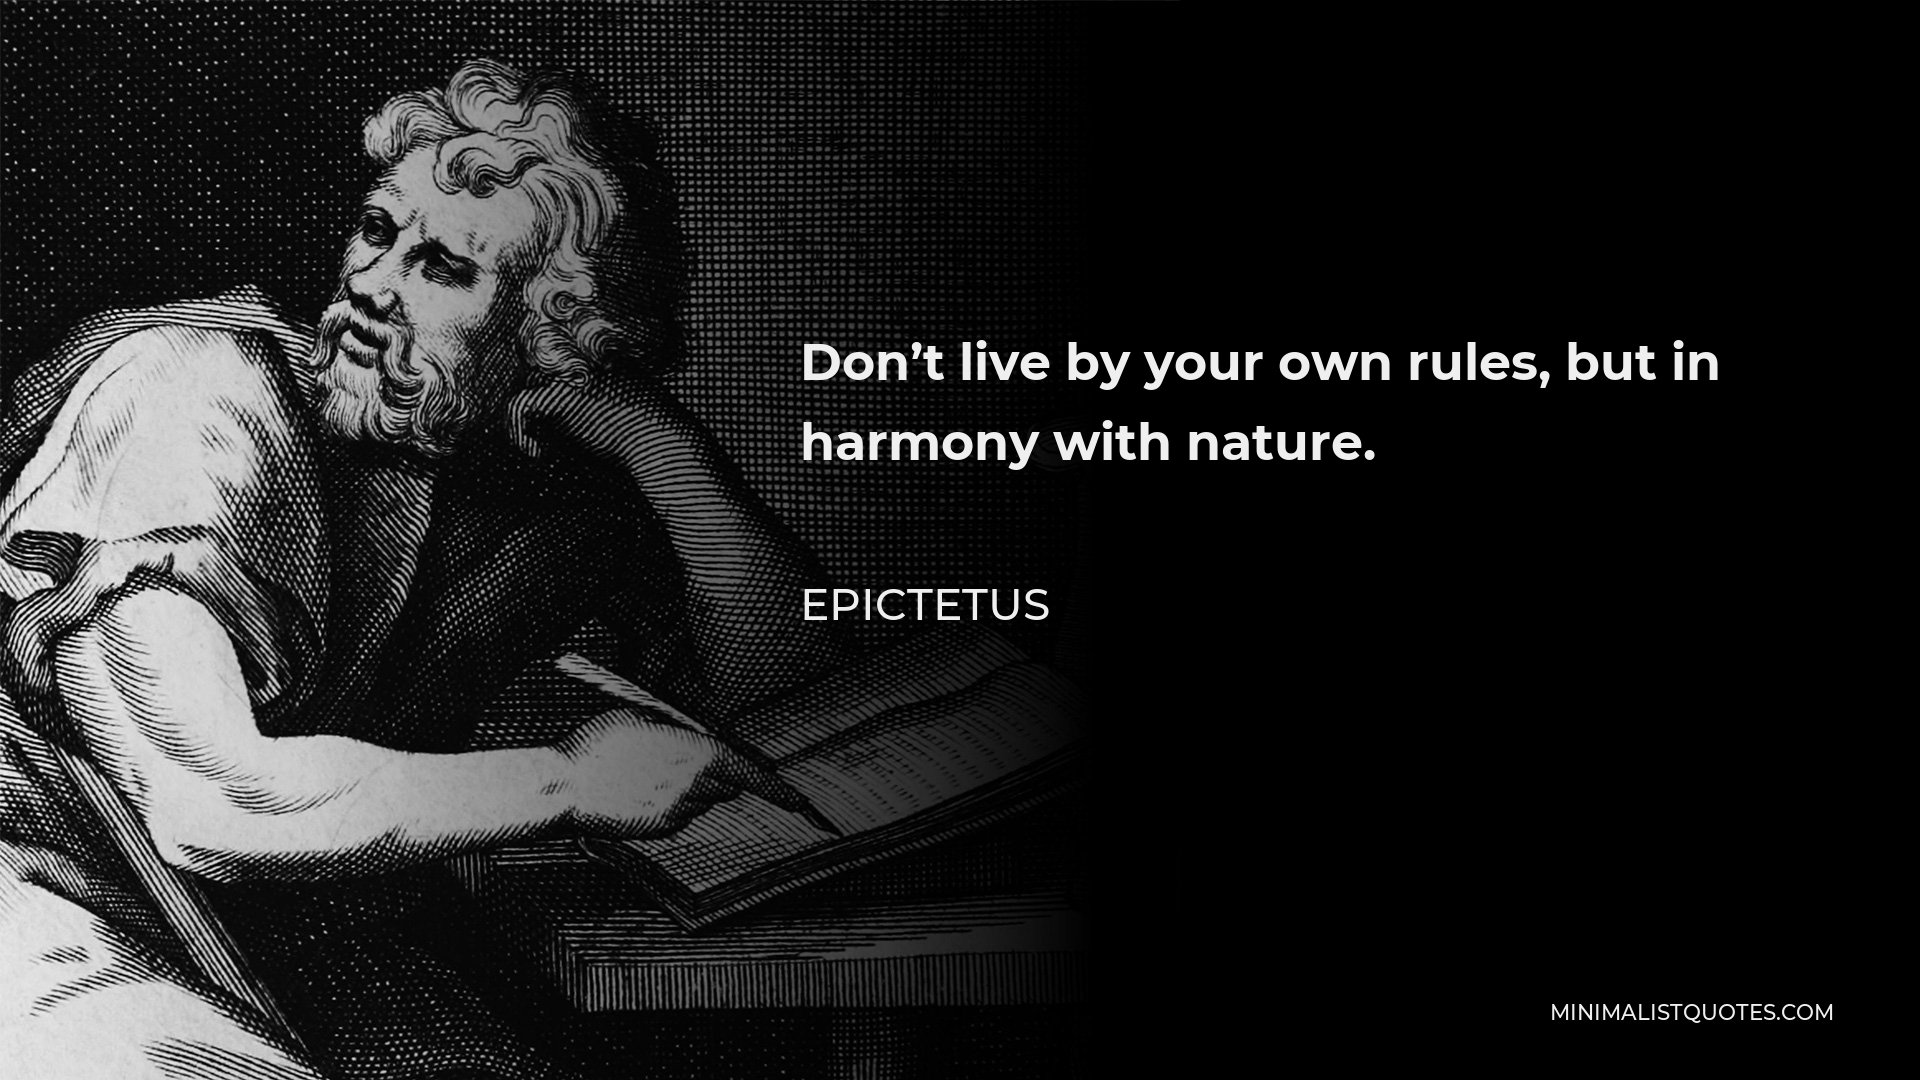 Epictetus Quote - Don’t live by your own rules, but in harmony with nature.